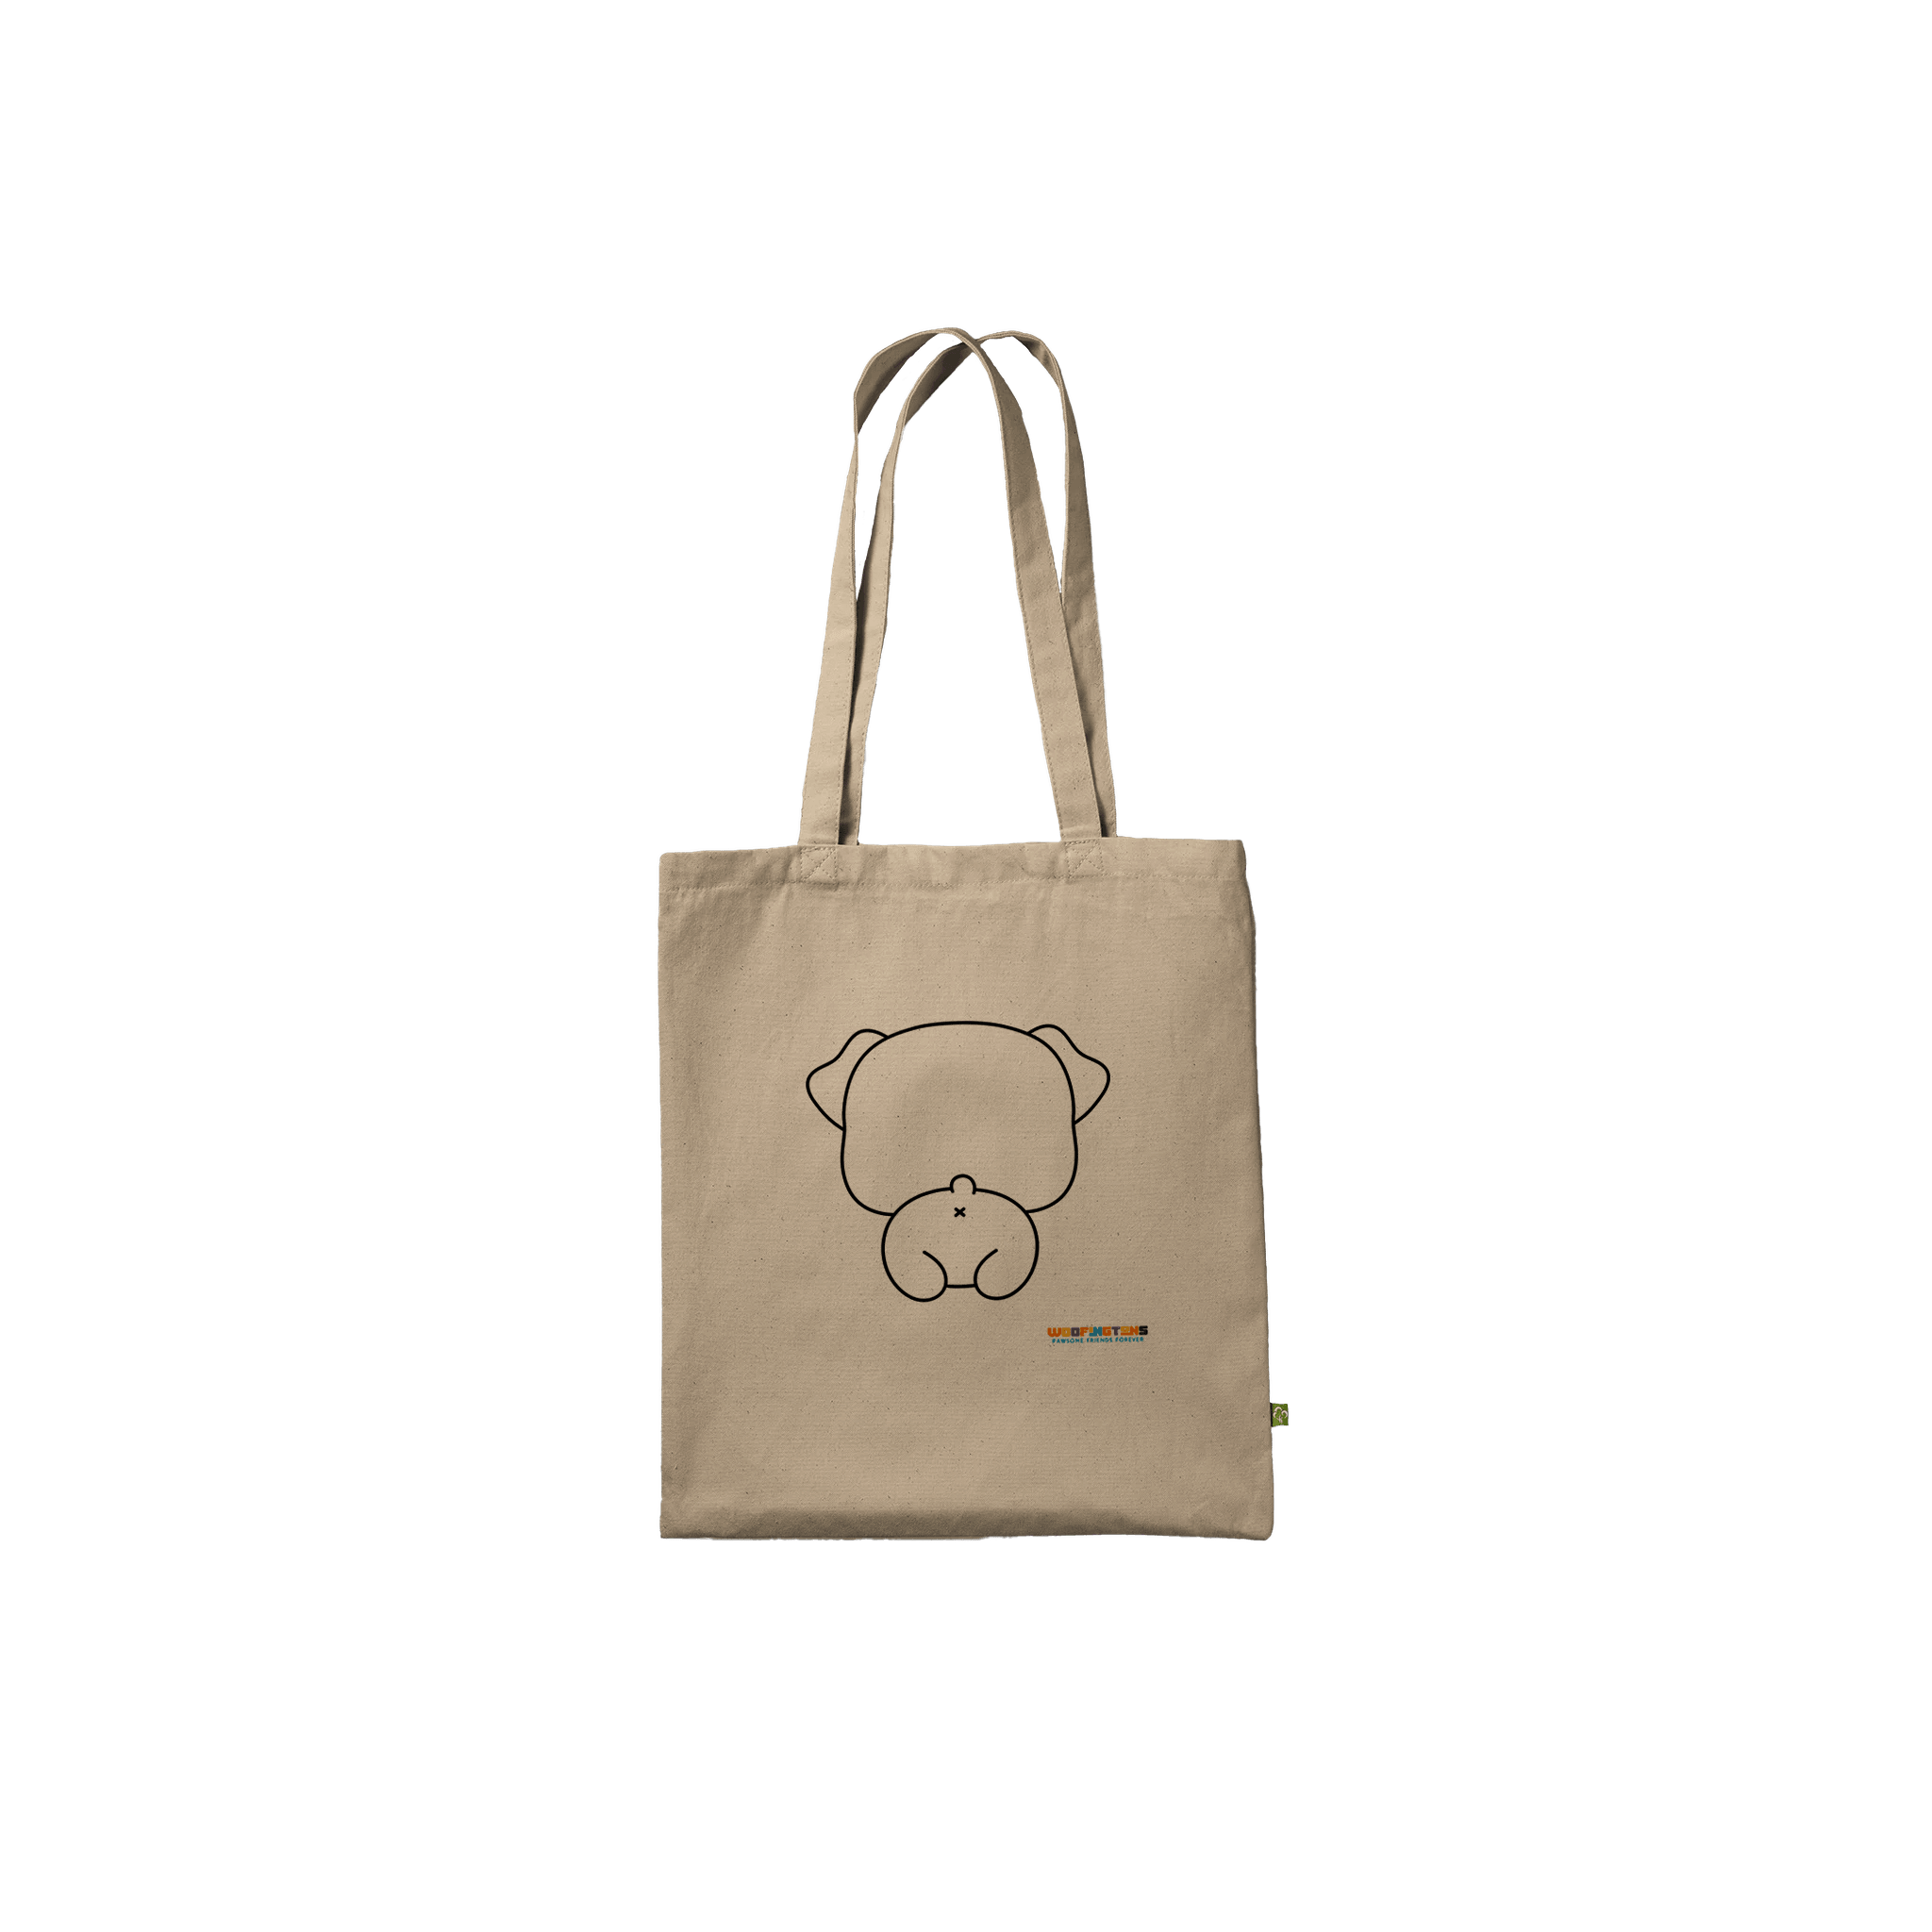 Xmas Dog Tote Bag: Furry and Bright - Woofingtons